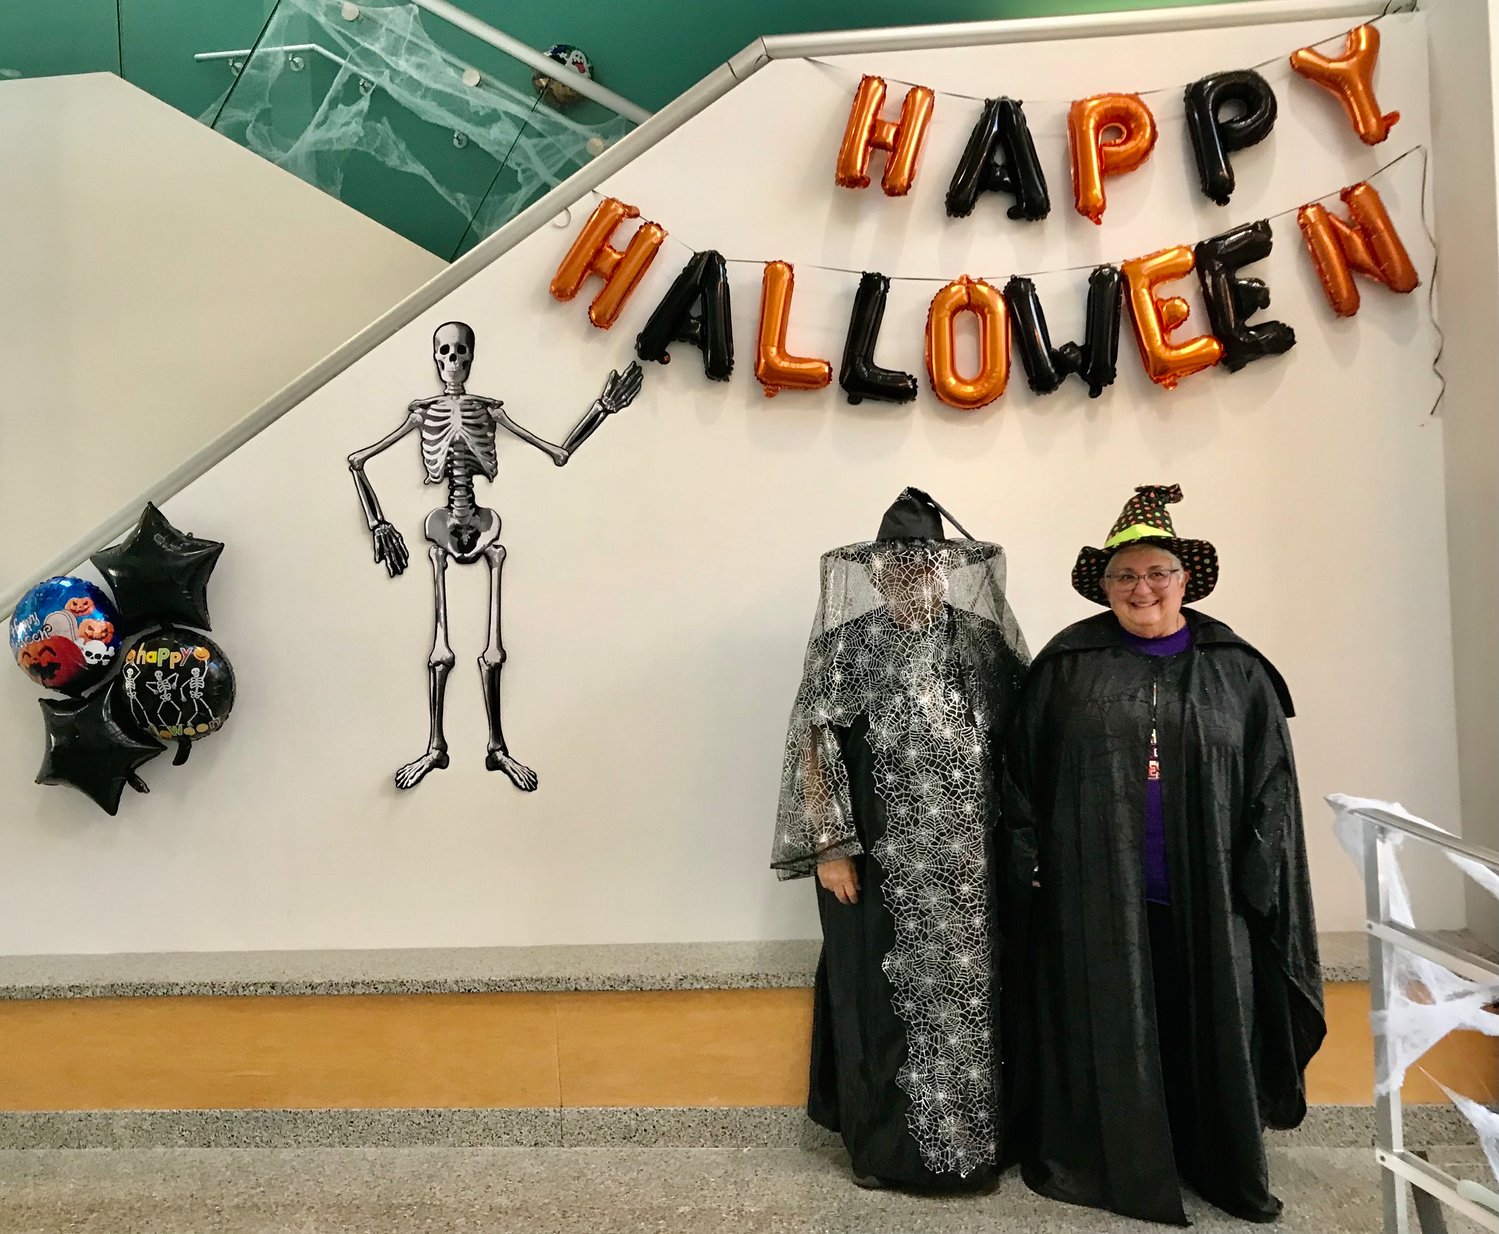 Filly Salsbury, left, and Mary Jo Manno welcome area kids and their chaperones Oct. 29 to the Halloween Celebration at Mohawk Valley Community College in Utica.